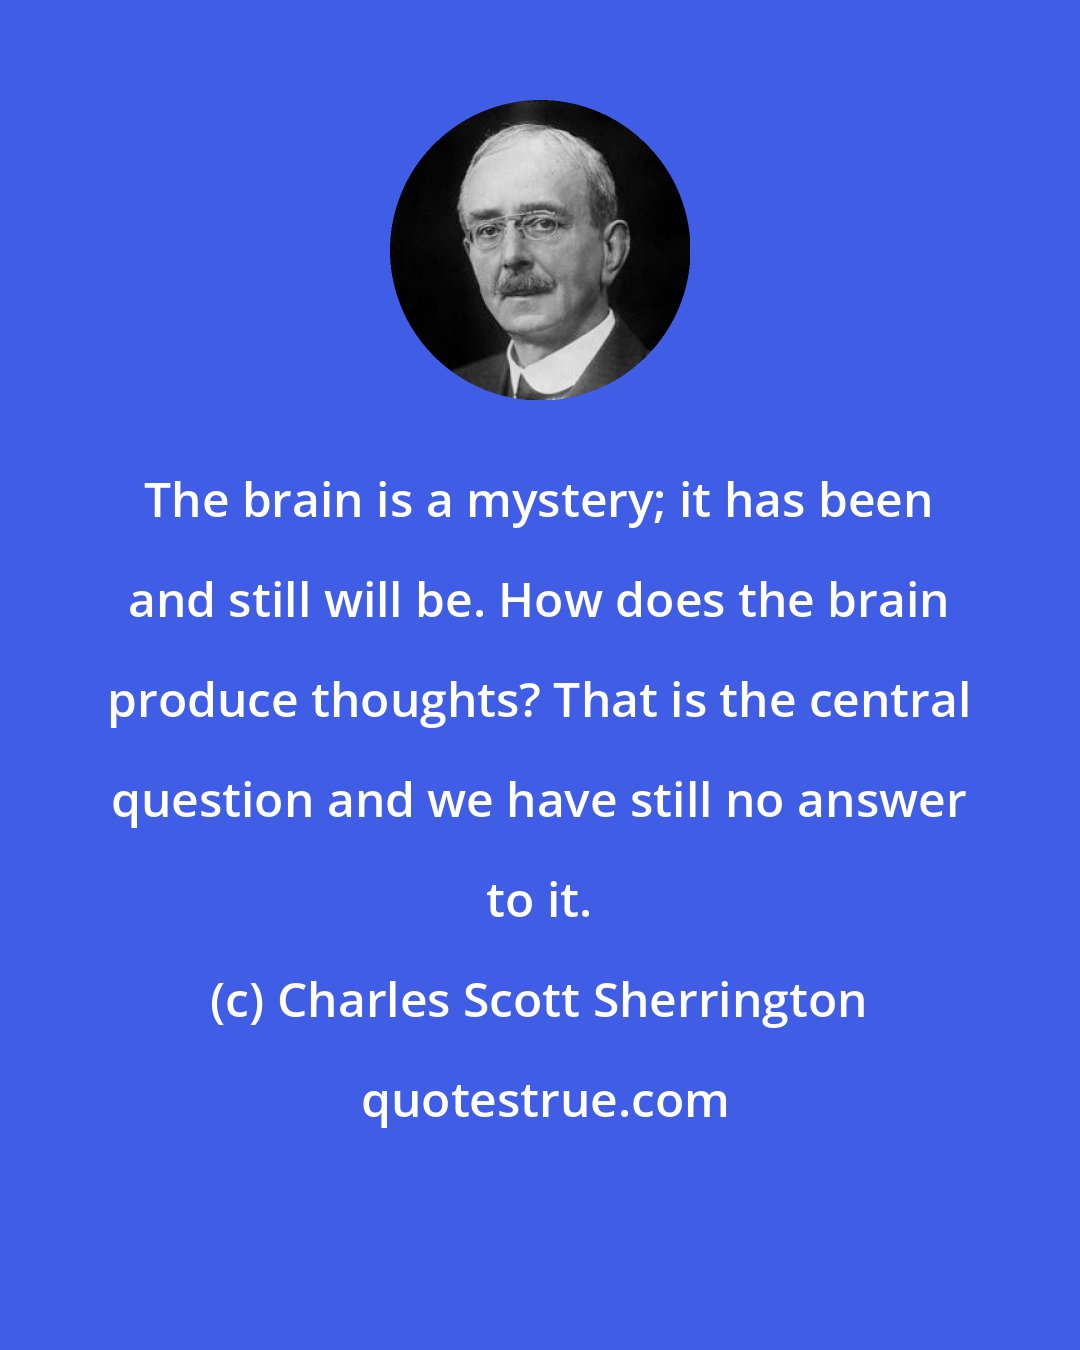 Charles Scott Sherrington: The brain is a mystery; it has been and still will be. How does the brain produce thoughts? That is the central question and we have still no answer to it.